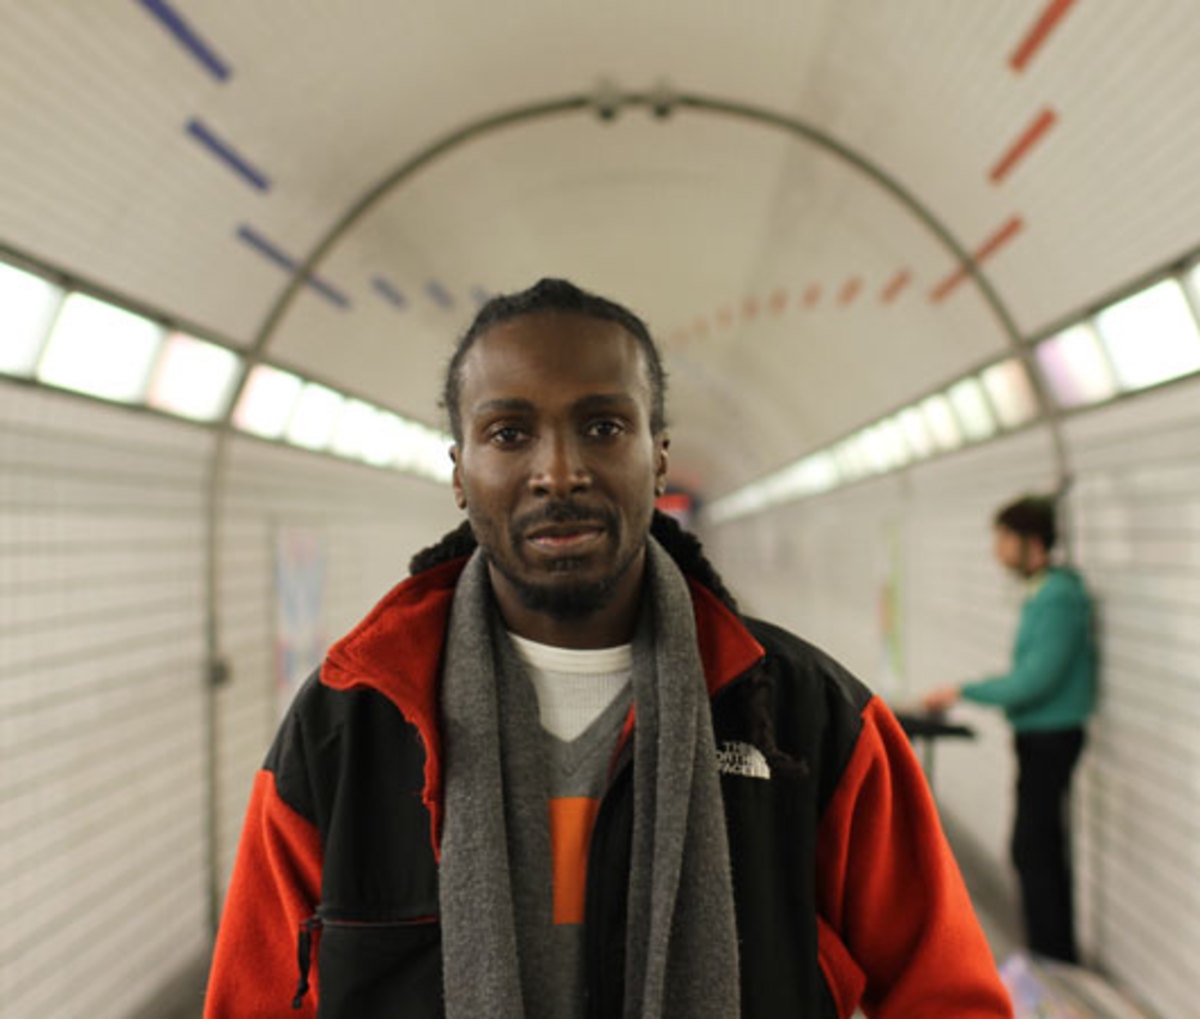 Footwork legend RP Boo announces new album ‘I’ll Tell You What!’